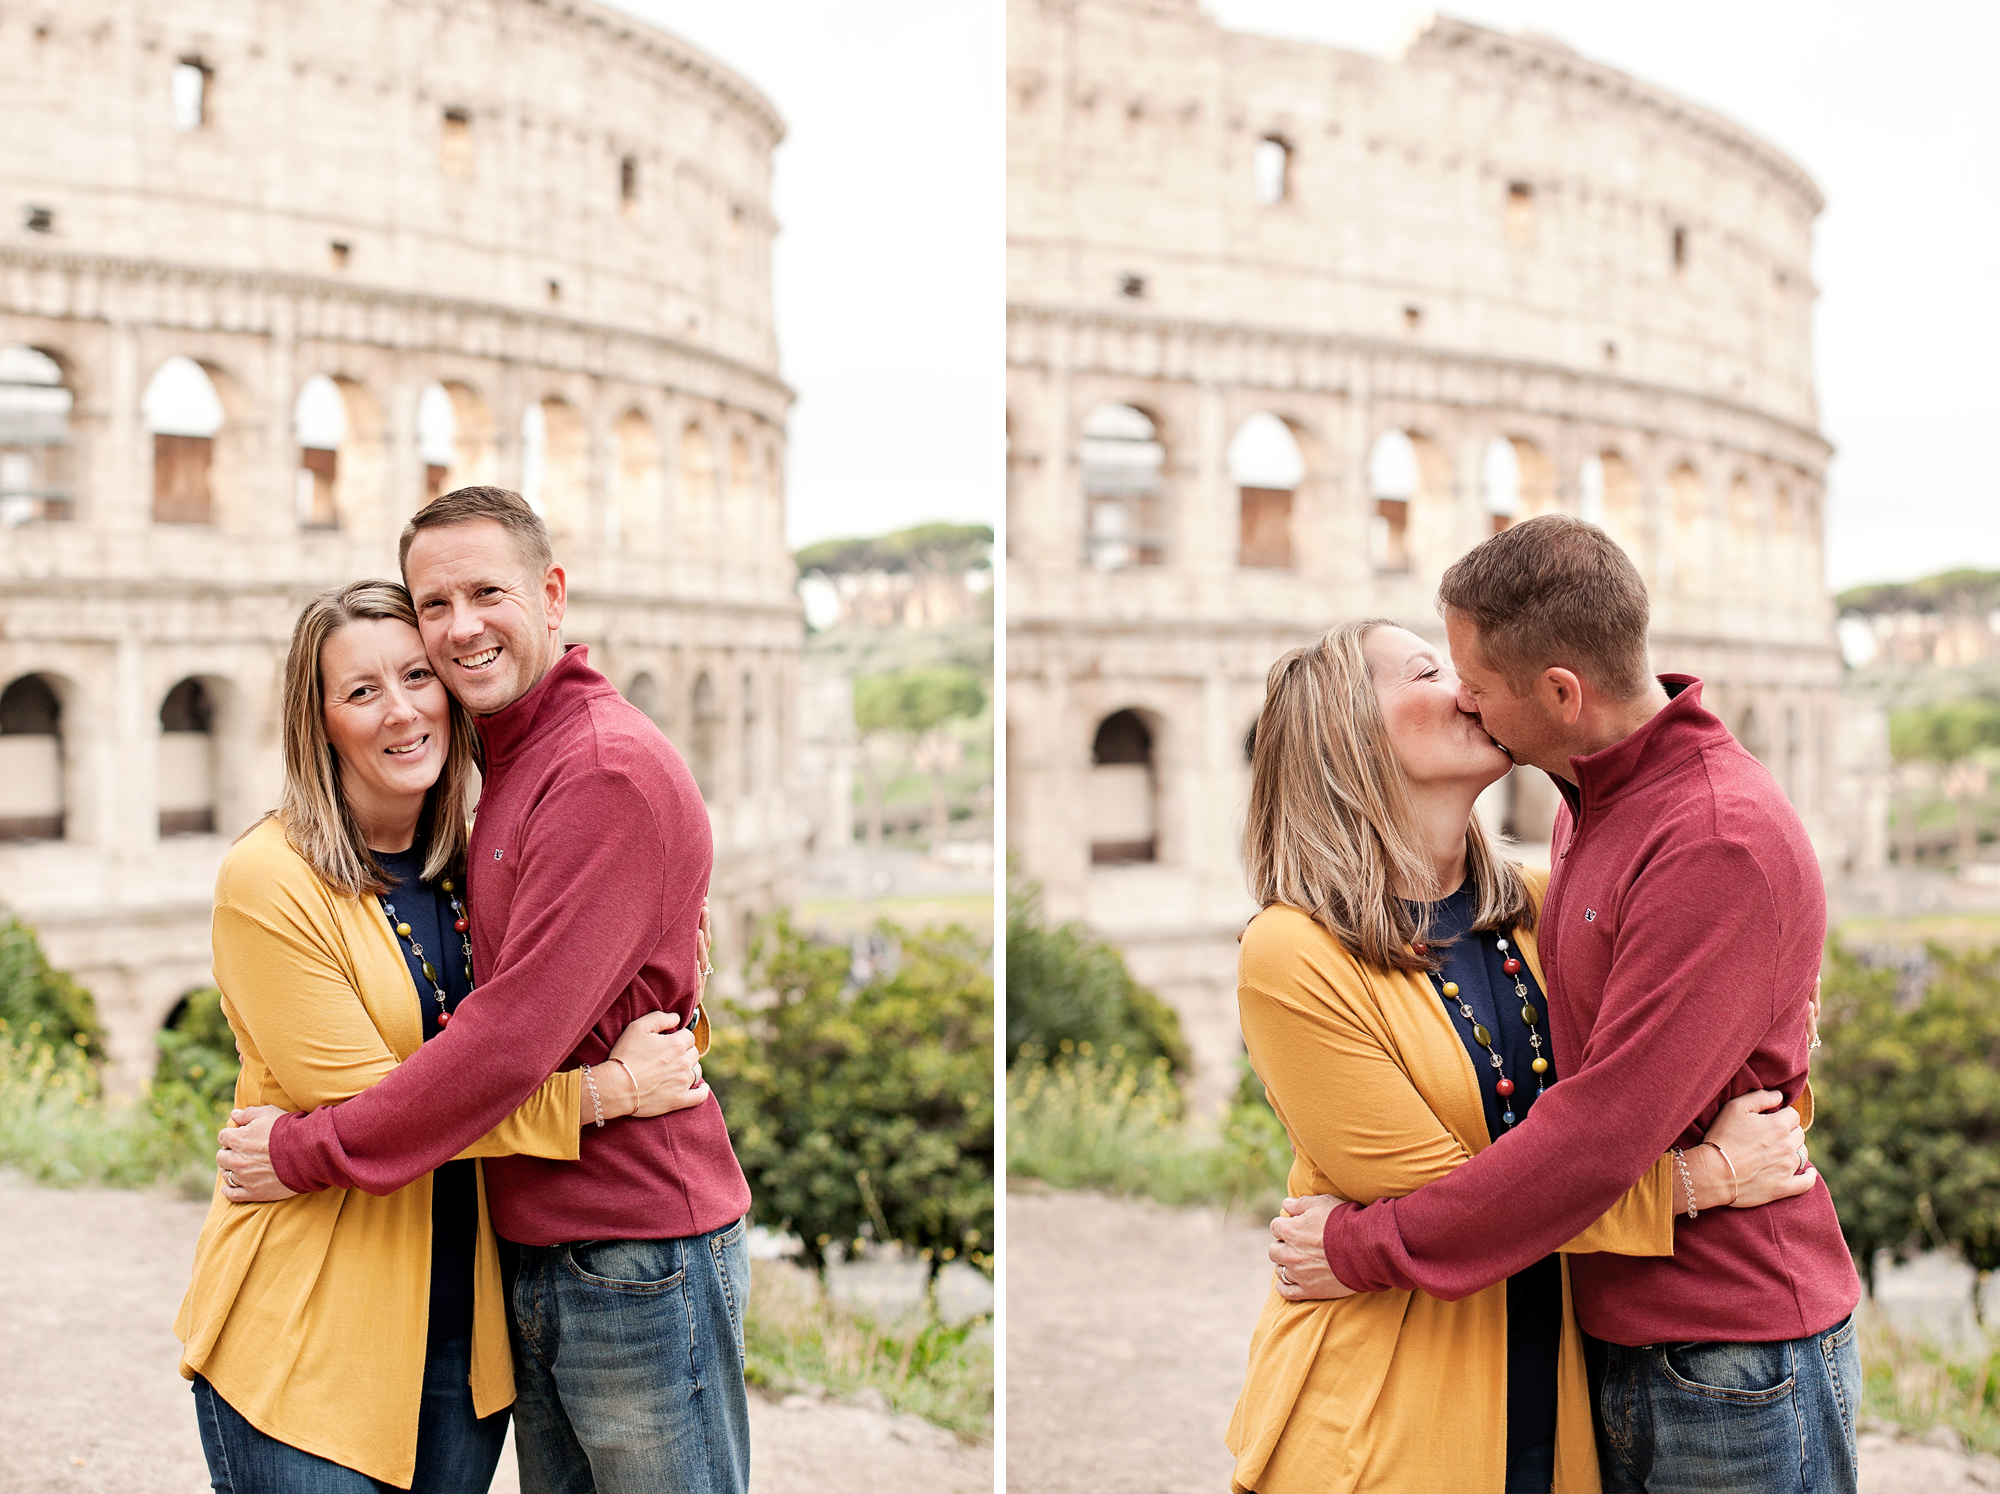 Honeymoon, vacation, family, engagement, maternity, wedding, love story individual and solo photoshoots in Rome, Italy by photographer Tricia Anne Photography | Rome Photographer, Colosseum Family Photoshoot, Rome Photo Shoot, colosseum photo shoot in rome, Rome Vacation Photographer, Rome Family Photographer, English speaking photographer in Rome